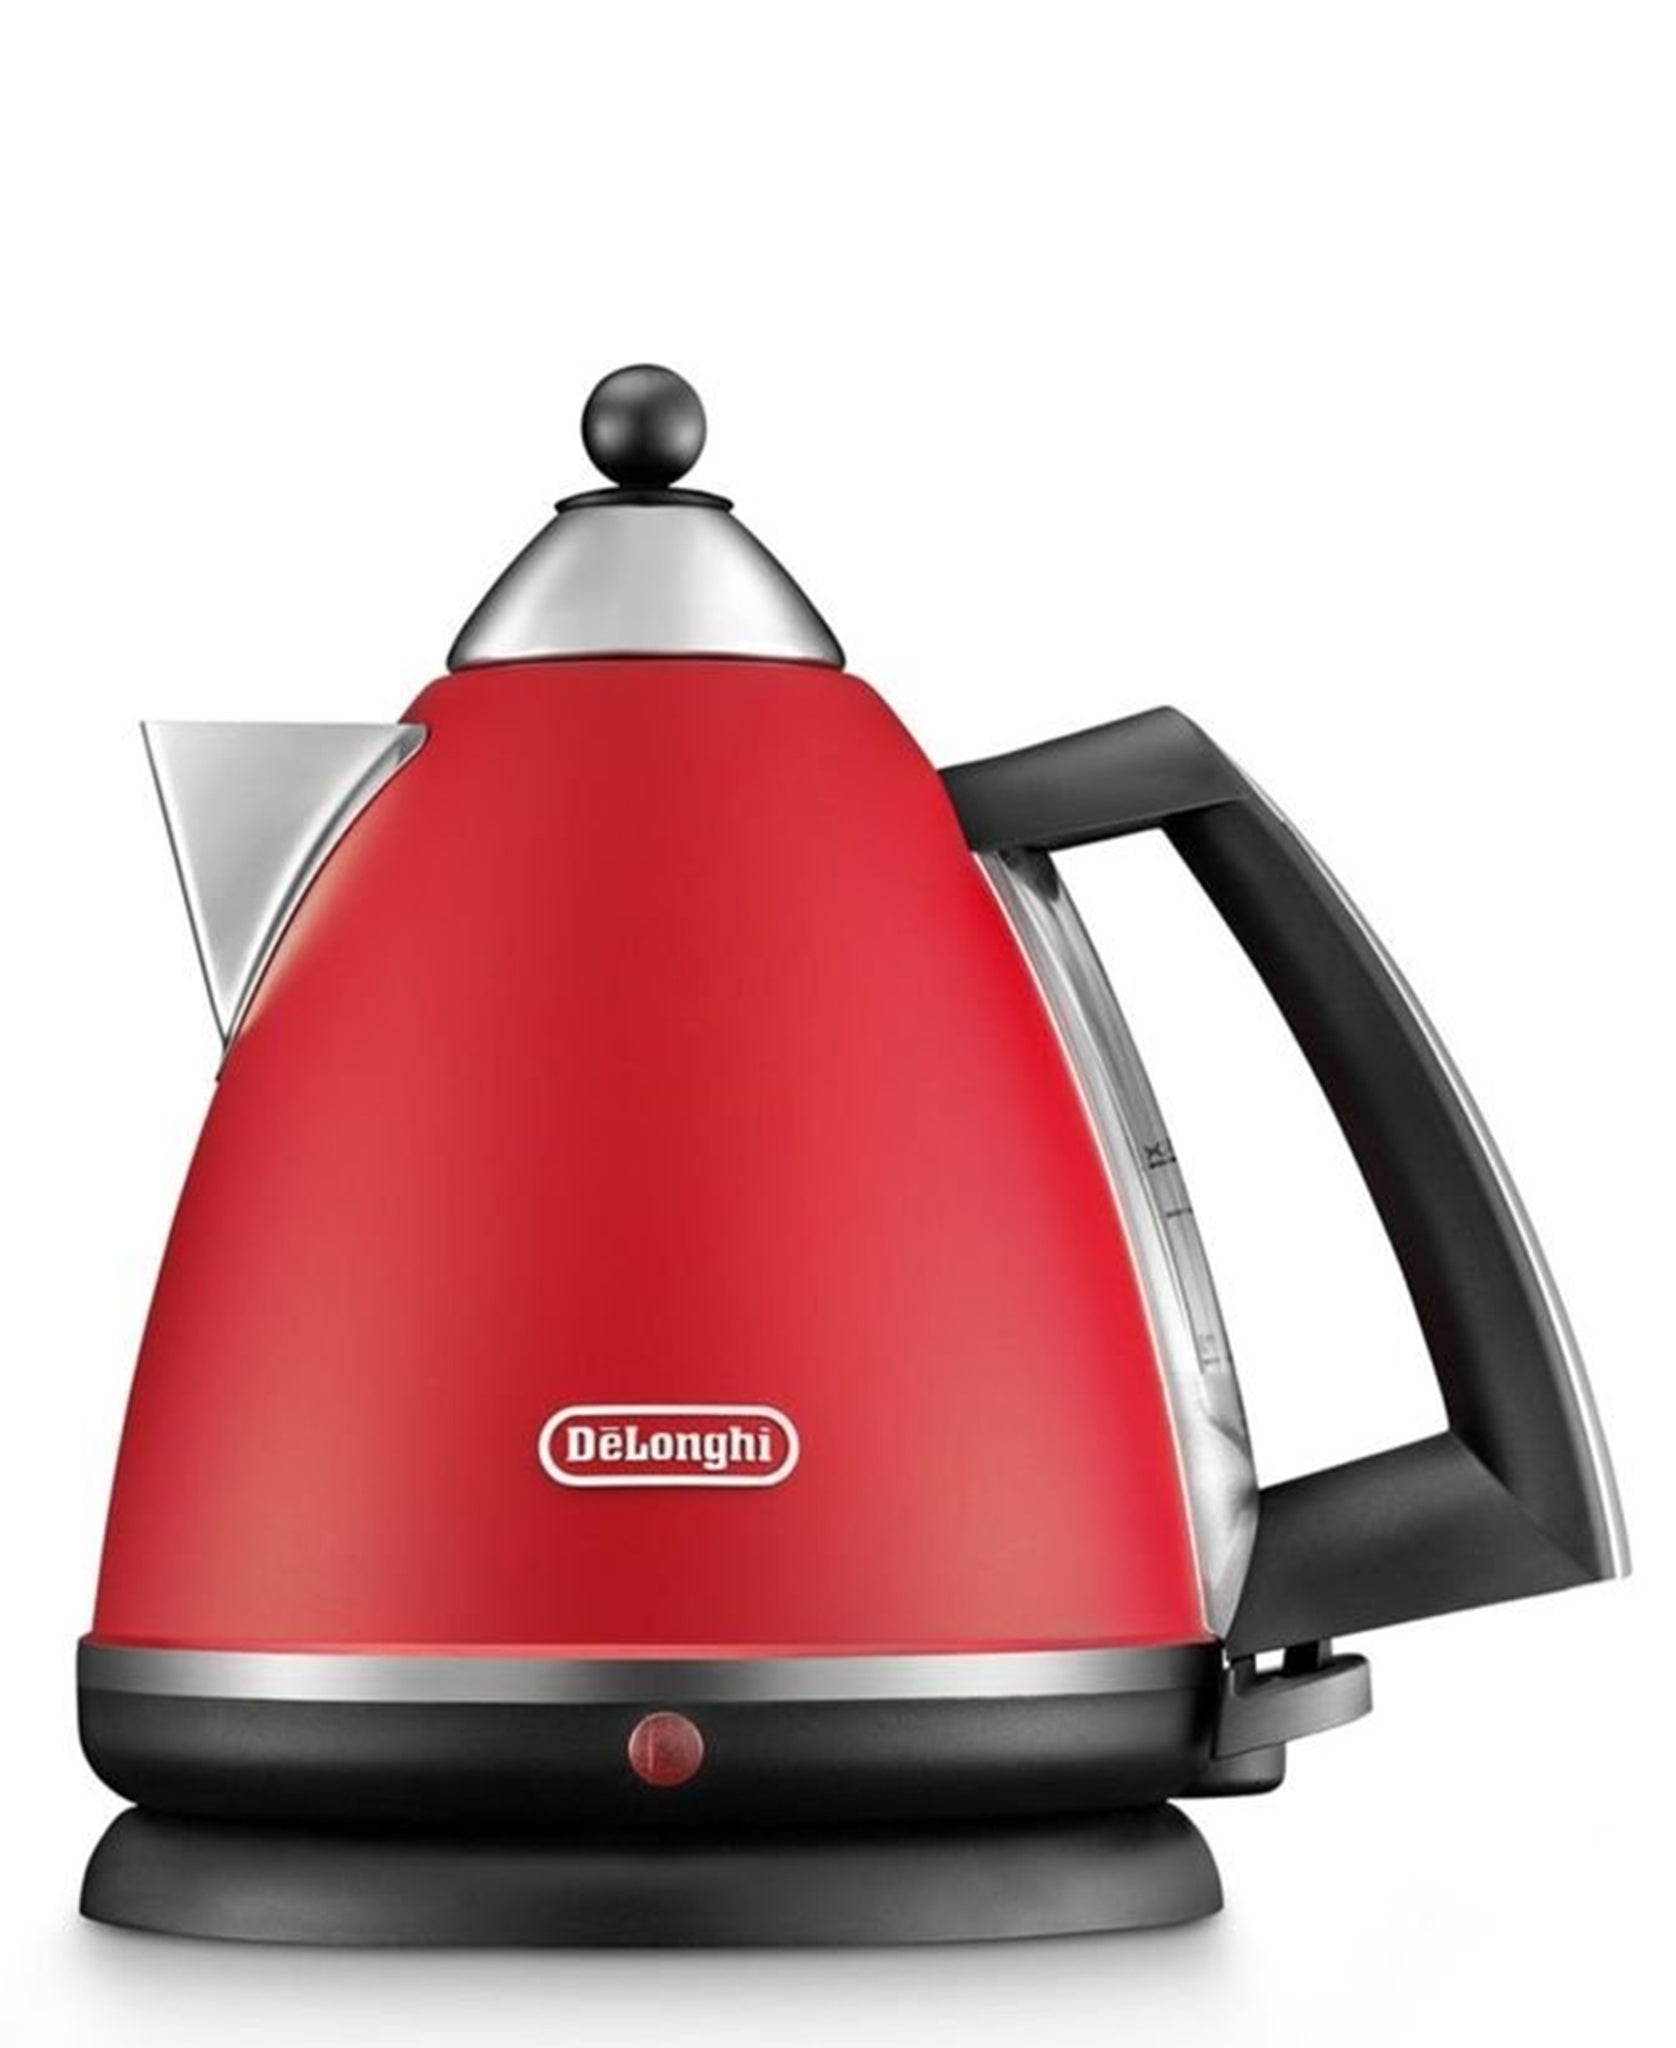 Delonghi Argento 1.7 Electric Kettle - Red